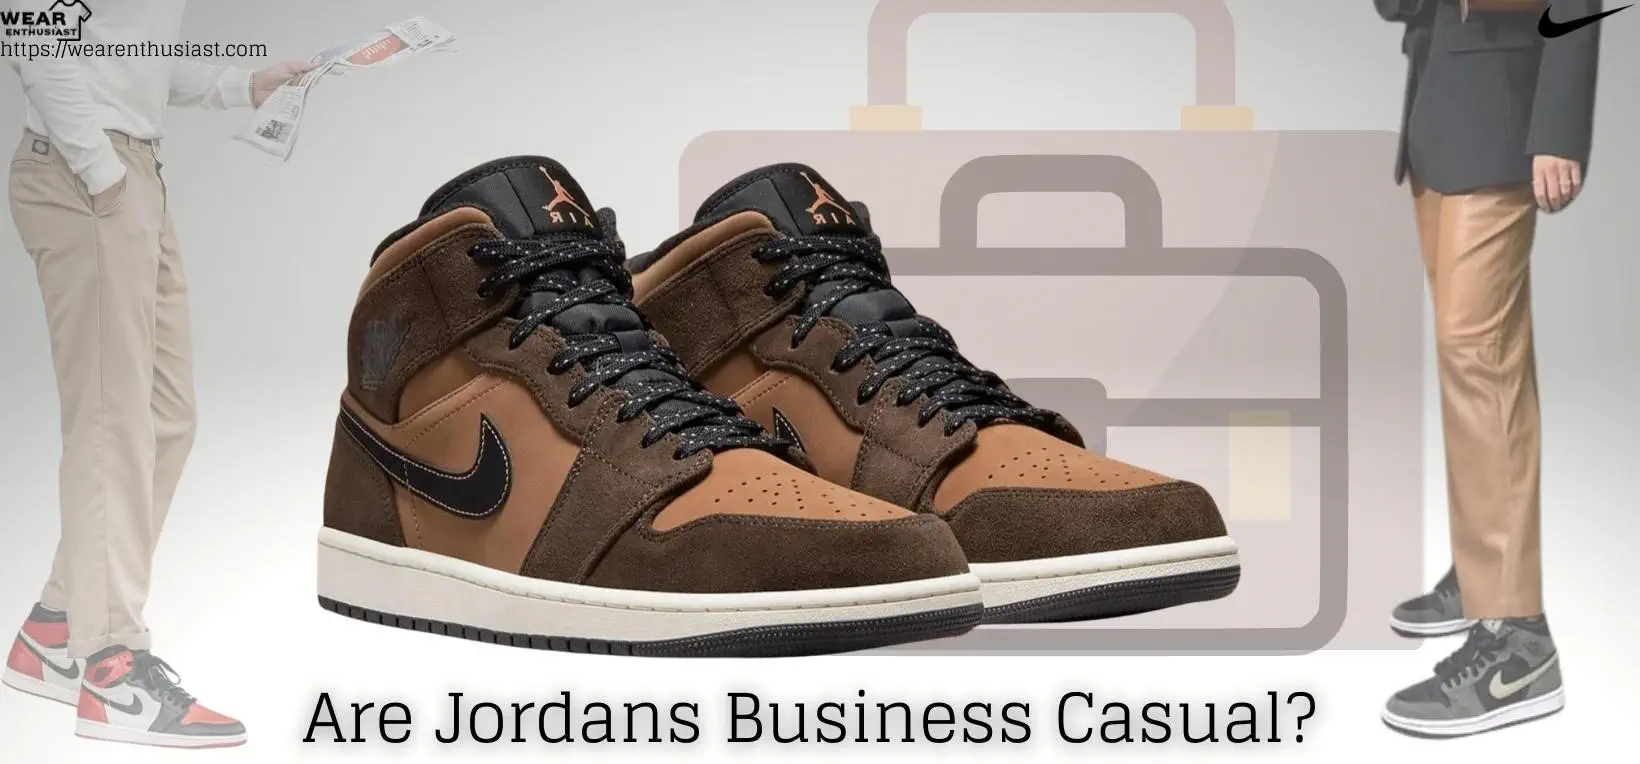 Are Jordans Business Casual?